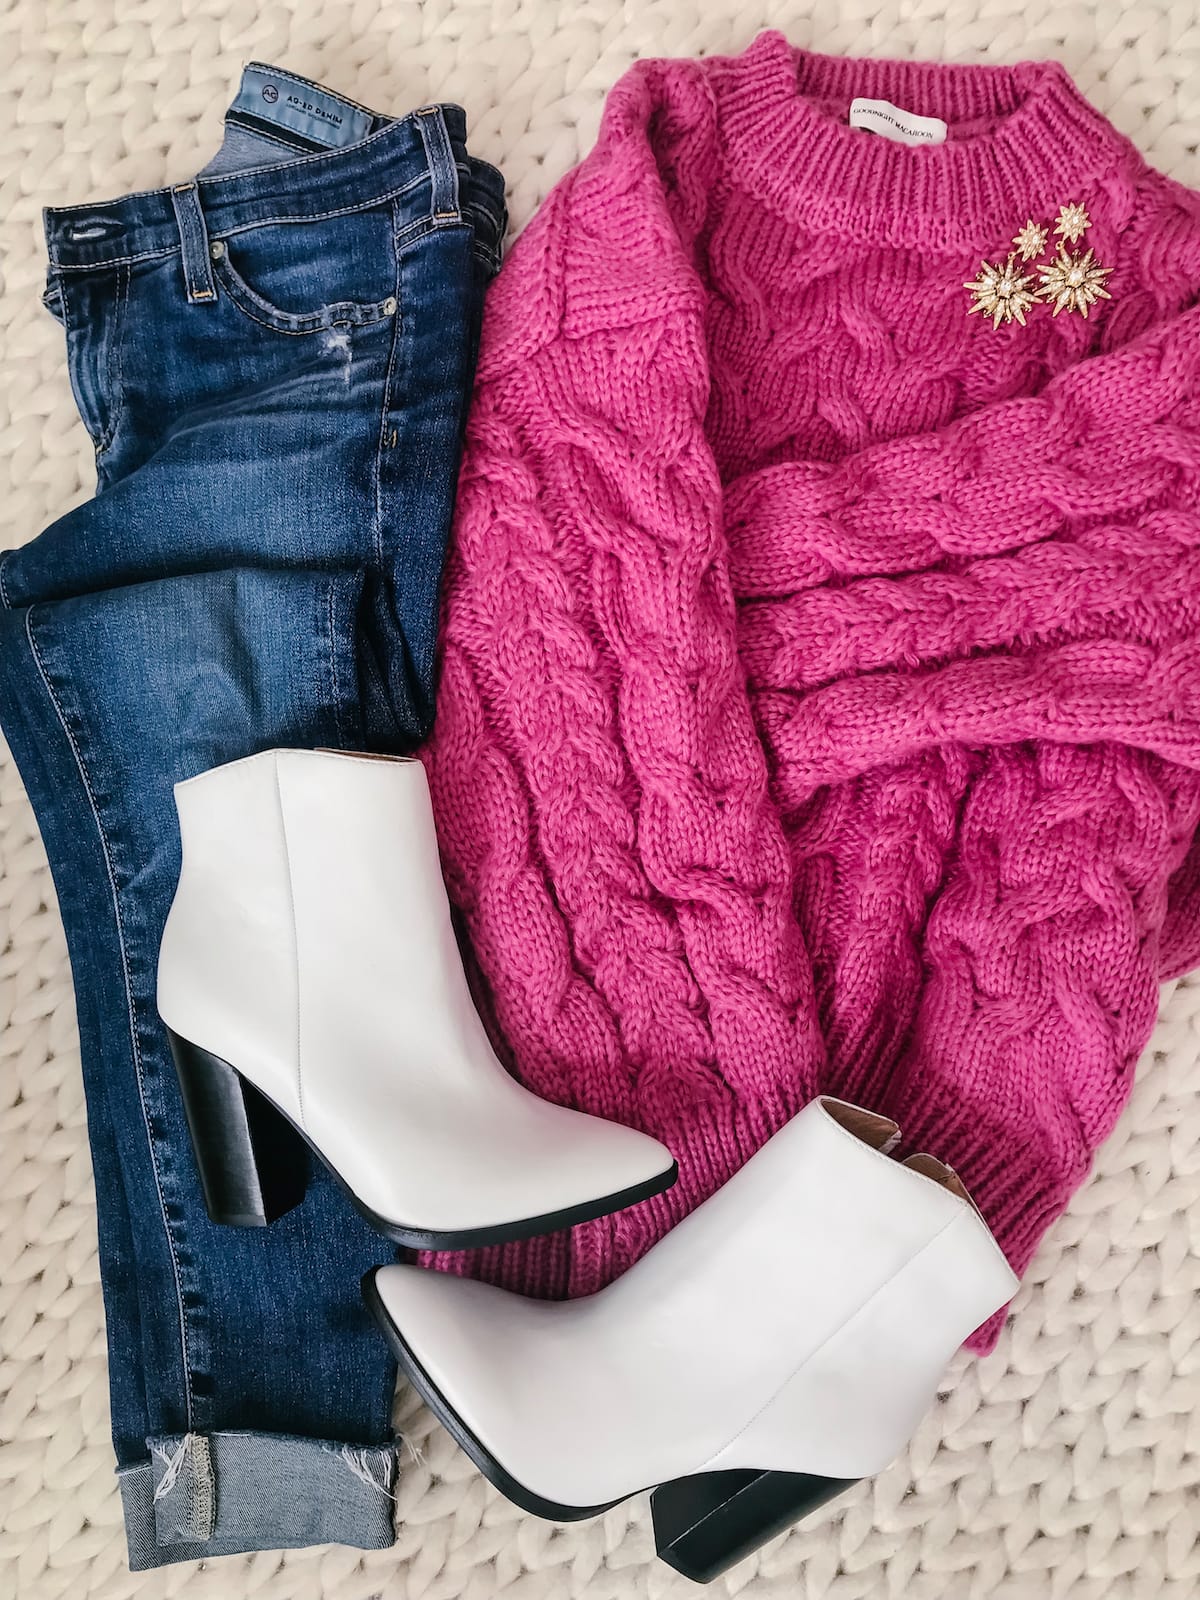 Winter outfit - pink sweater and white booties